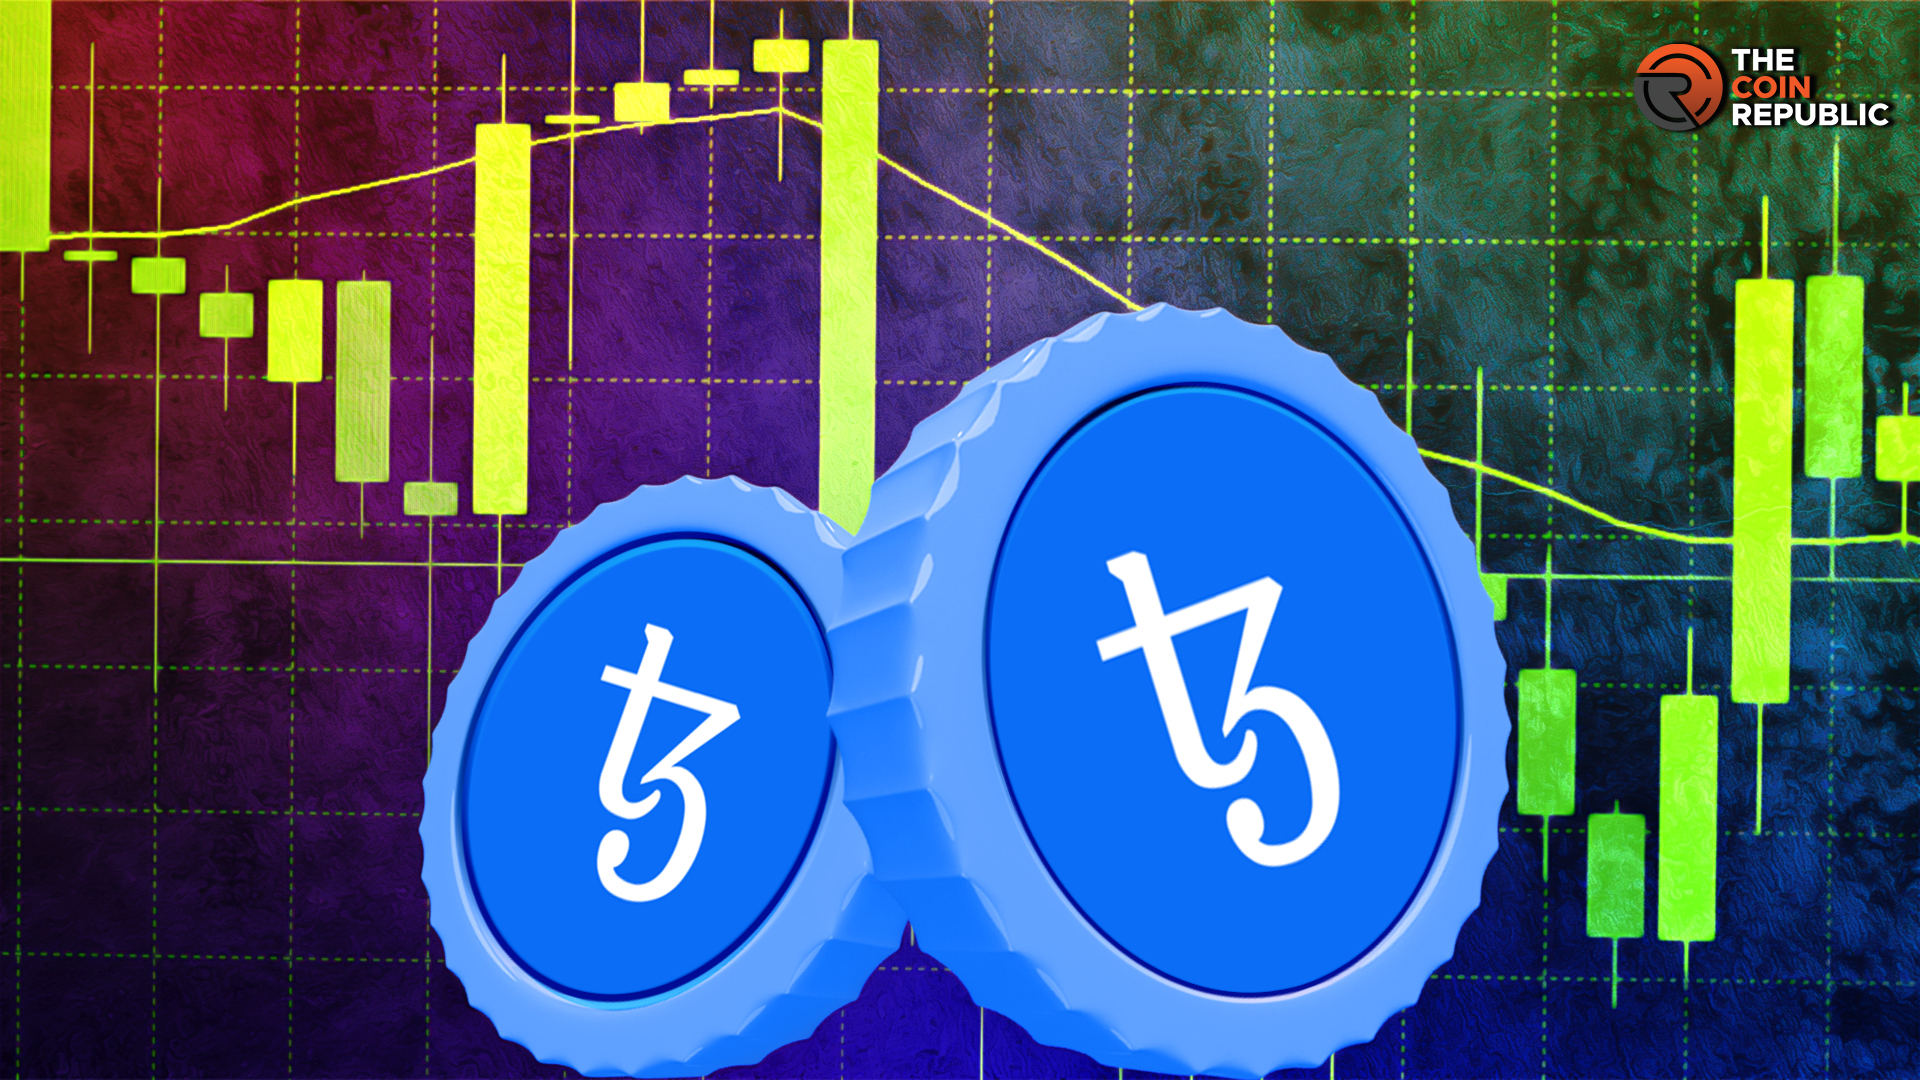 Tezos Price Fails to Gain Traction: Is a Major Correction Looming?